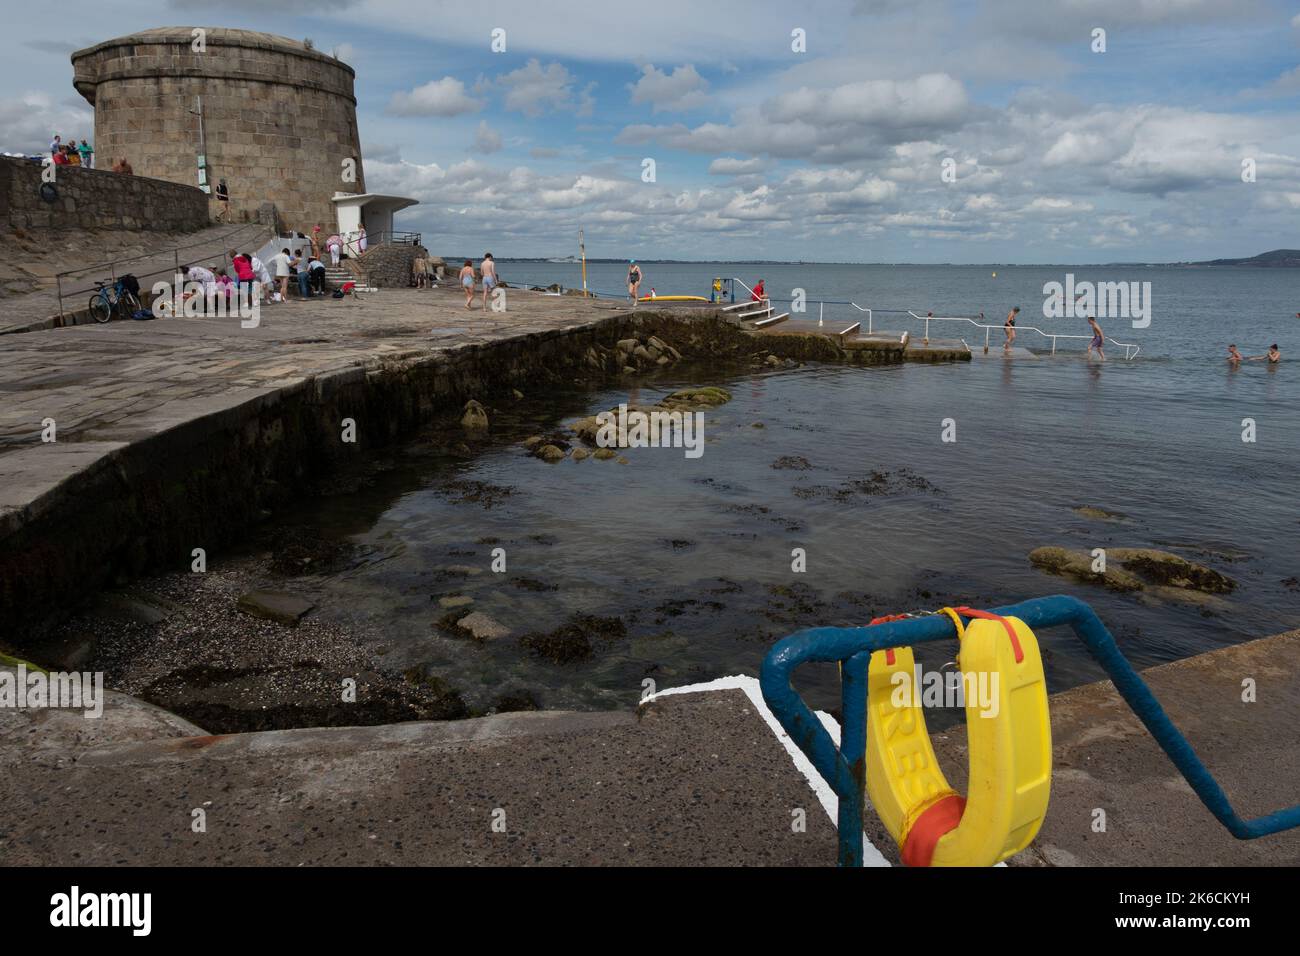 Martello tower at Seapoint beach  Dublin Bay in Ireland. Between Blackrock and Monkstown, this area is known for its beach and bathing areas Stock Photo